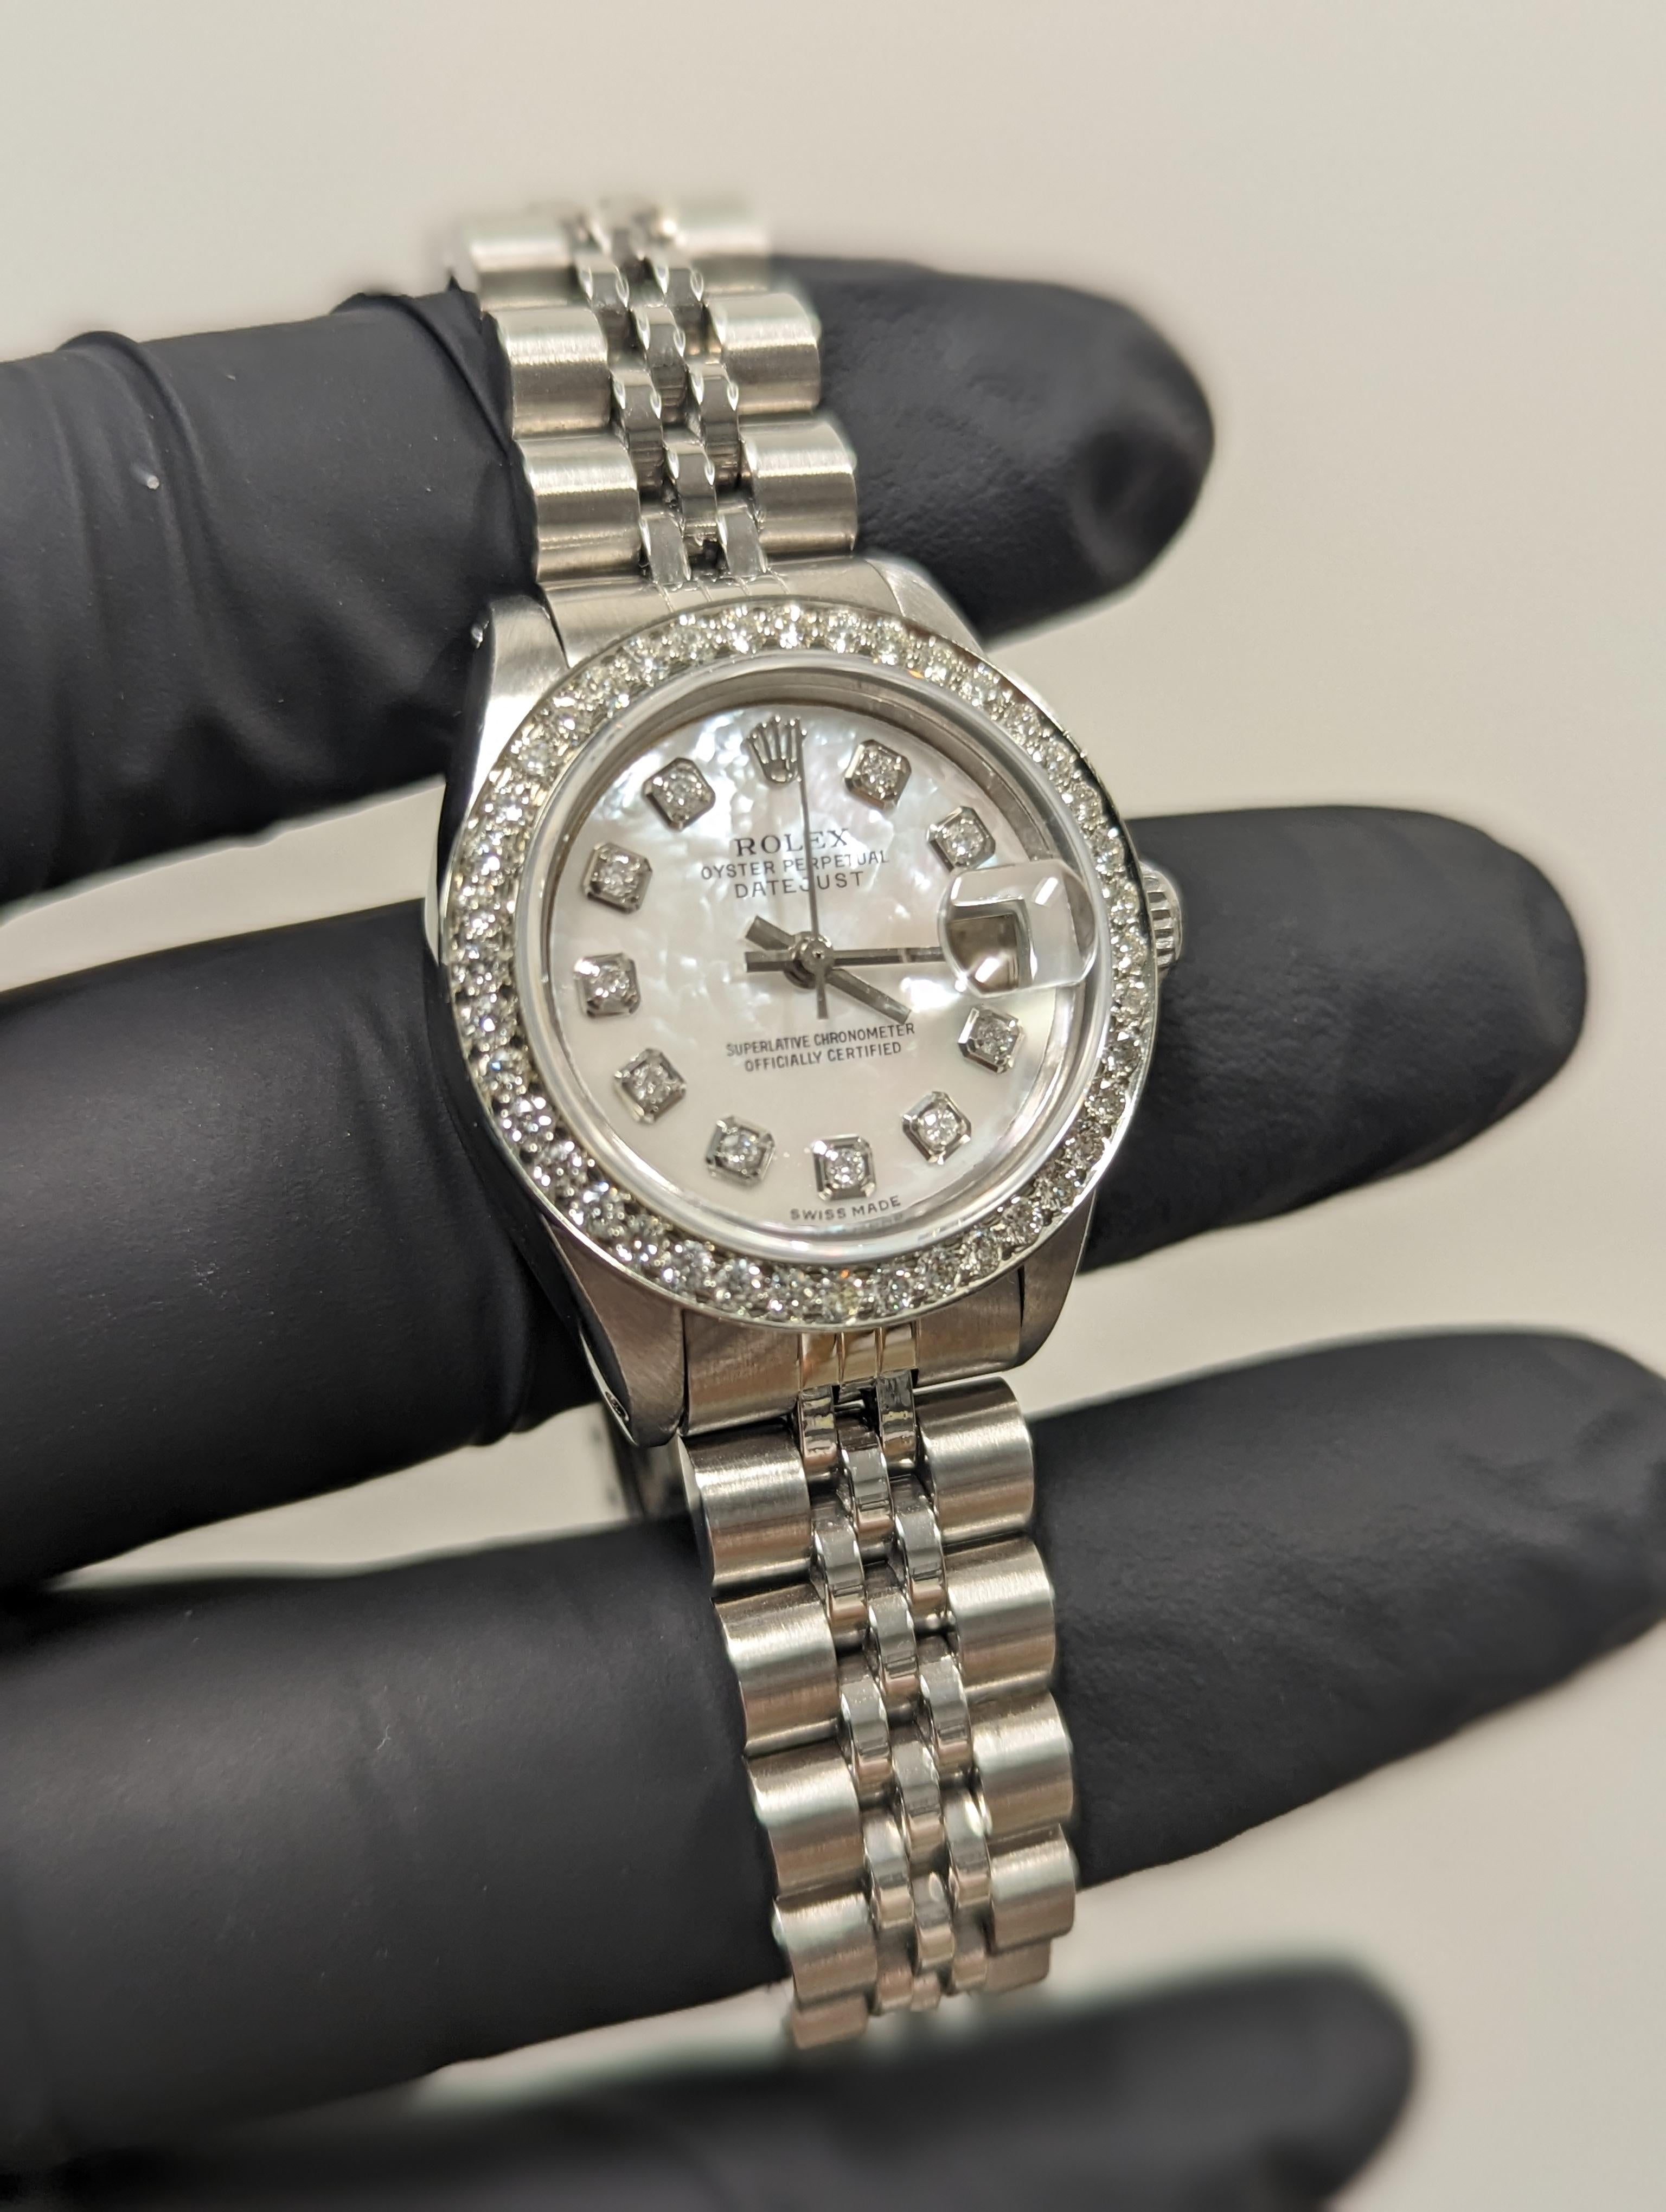 Perle Rolex Ladies Datejust White Mother of Pearl Diamond Dial Jubilee Band Watch en vente